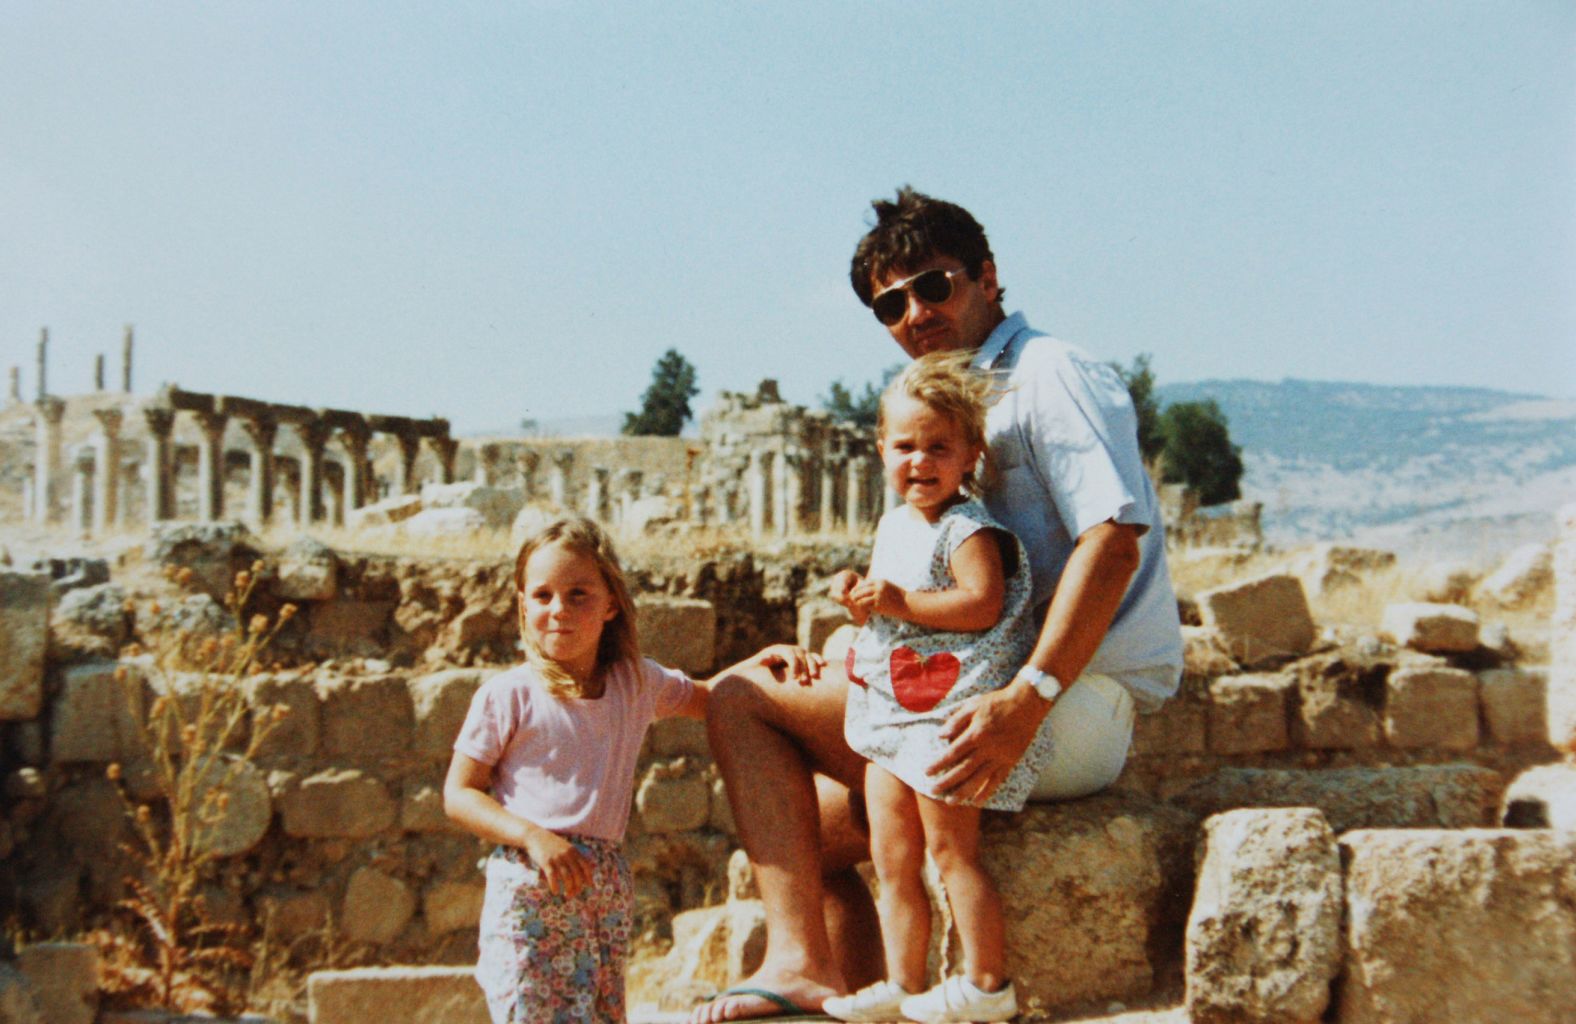 Kate and her younger sister, Pippa, are seen with their father, Michael, in Jerash, Jordan. The Middleton family lived in Jordan for two and a half years.